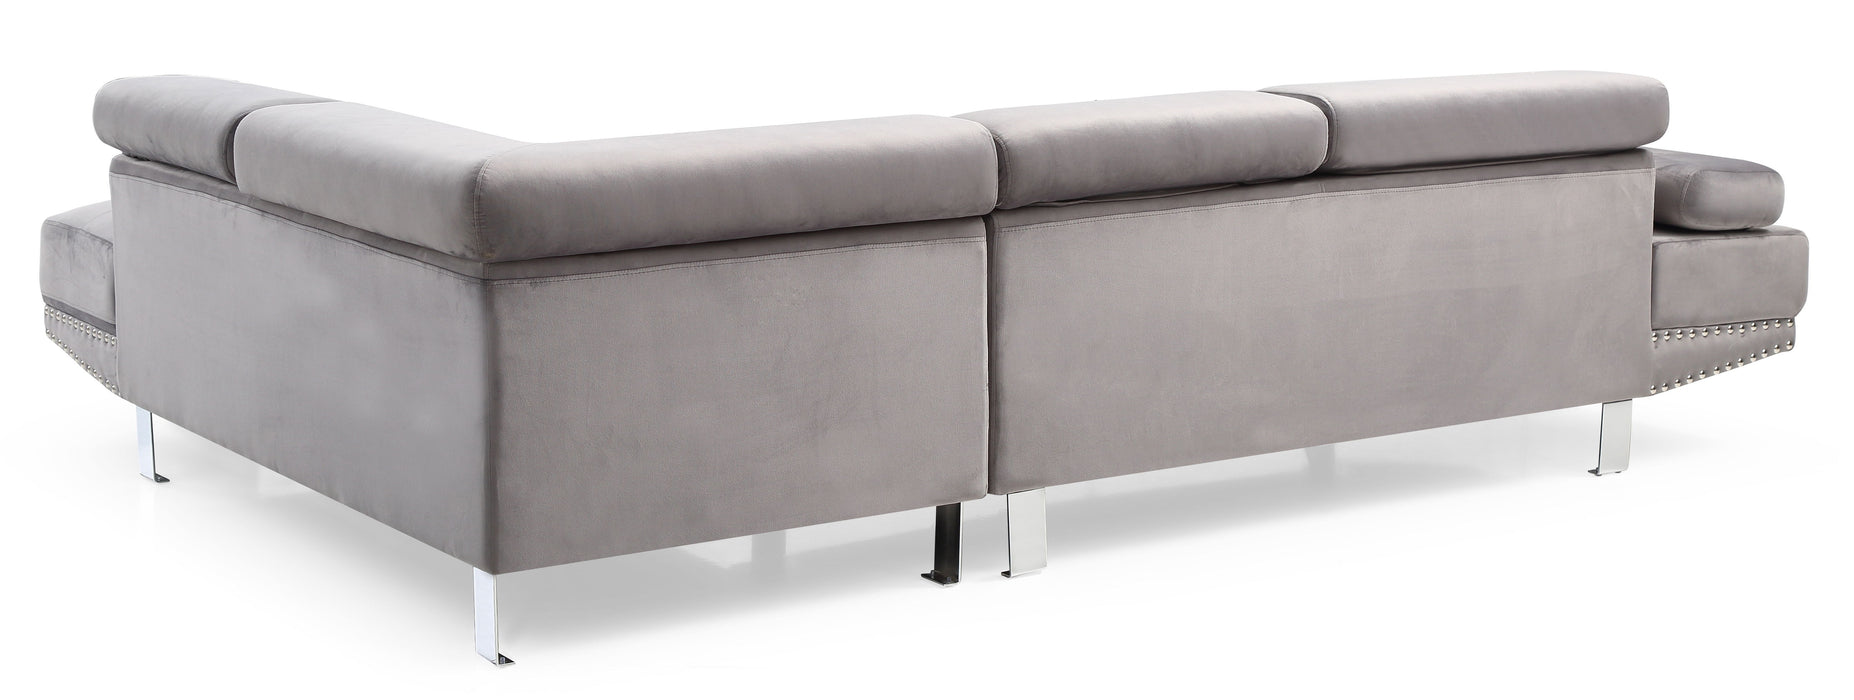 Glory Furniture DerEastern King Sectional, Gray